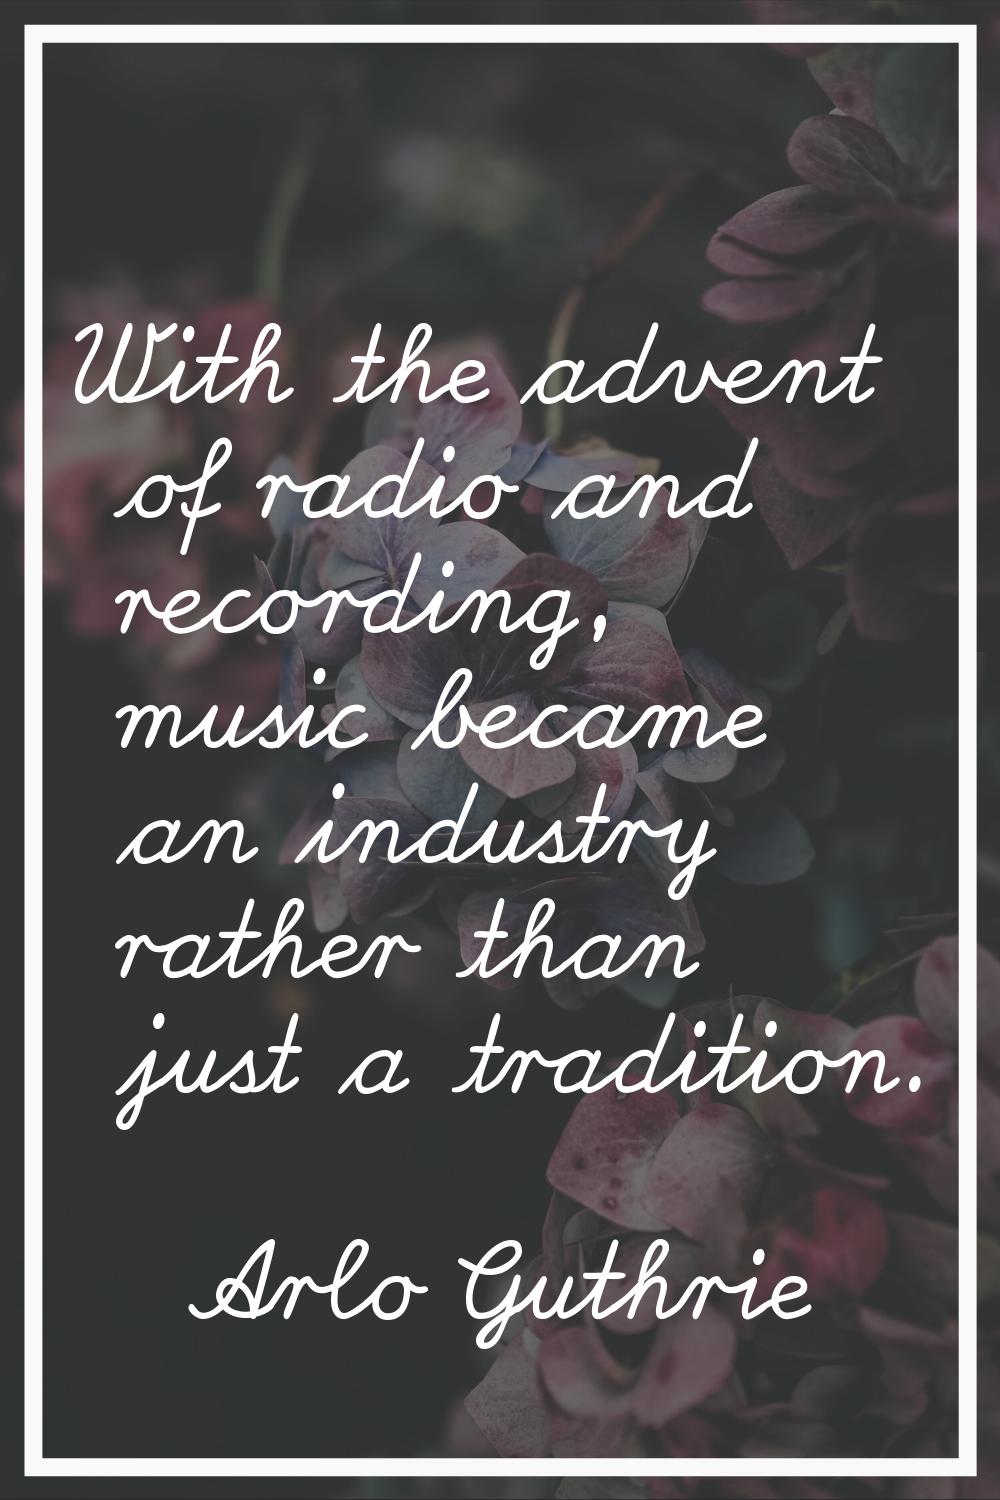 With the advent of radio and recording, music became an industry rather than just a tradition.